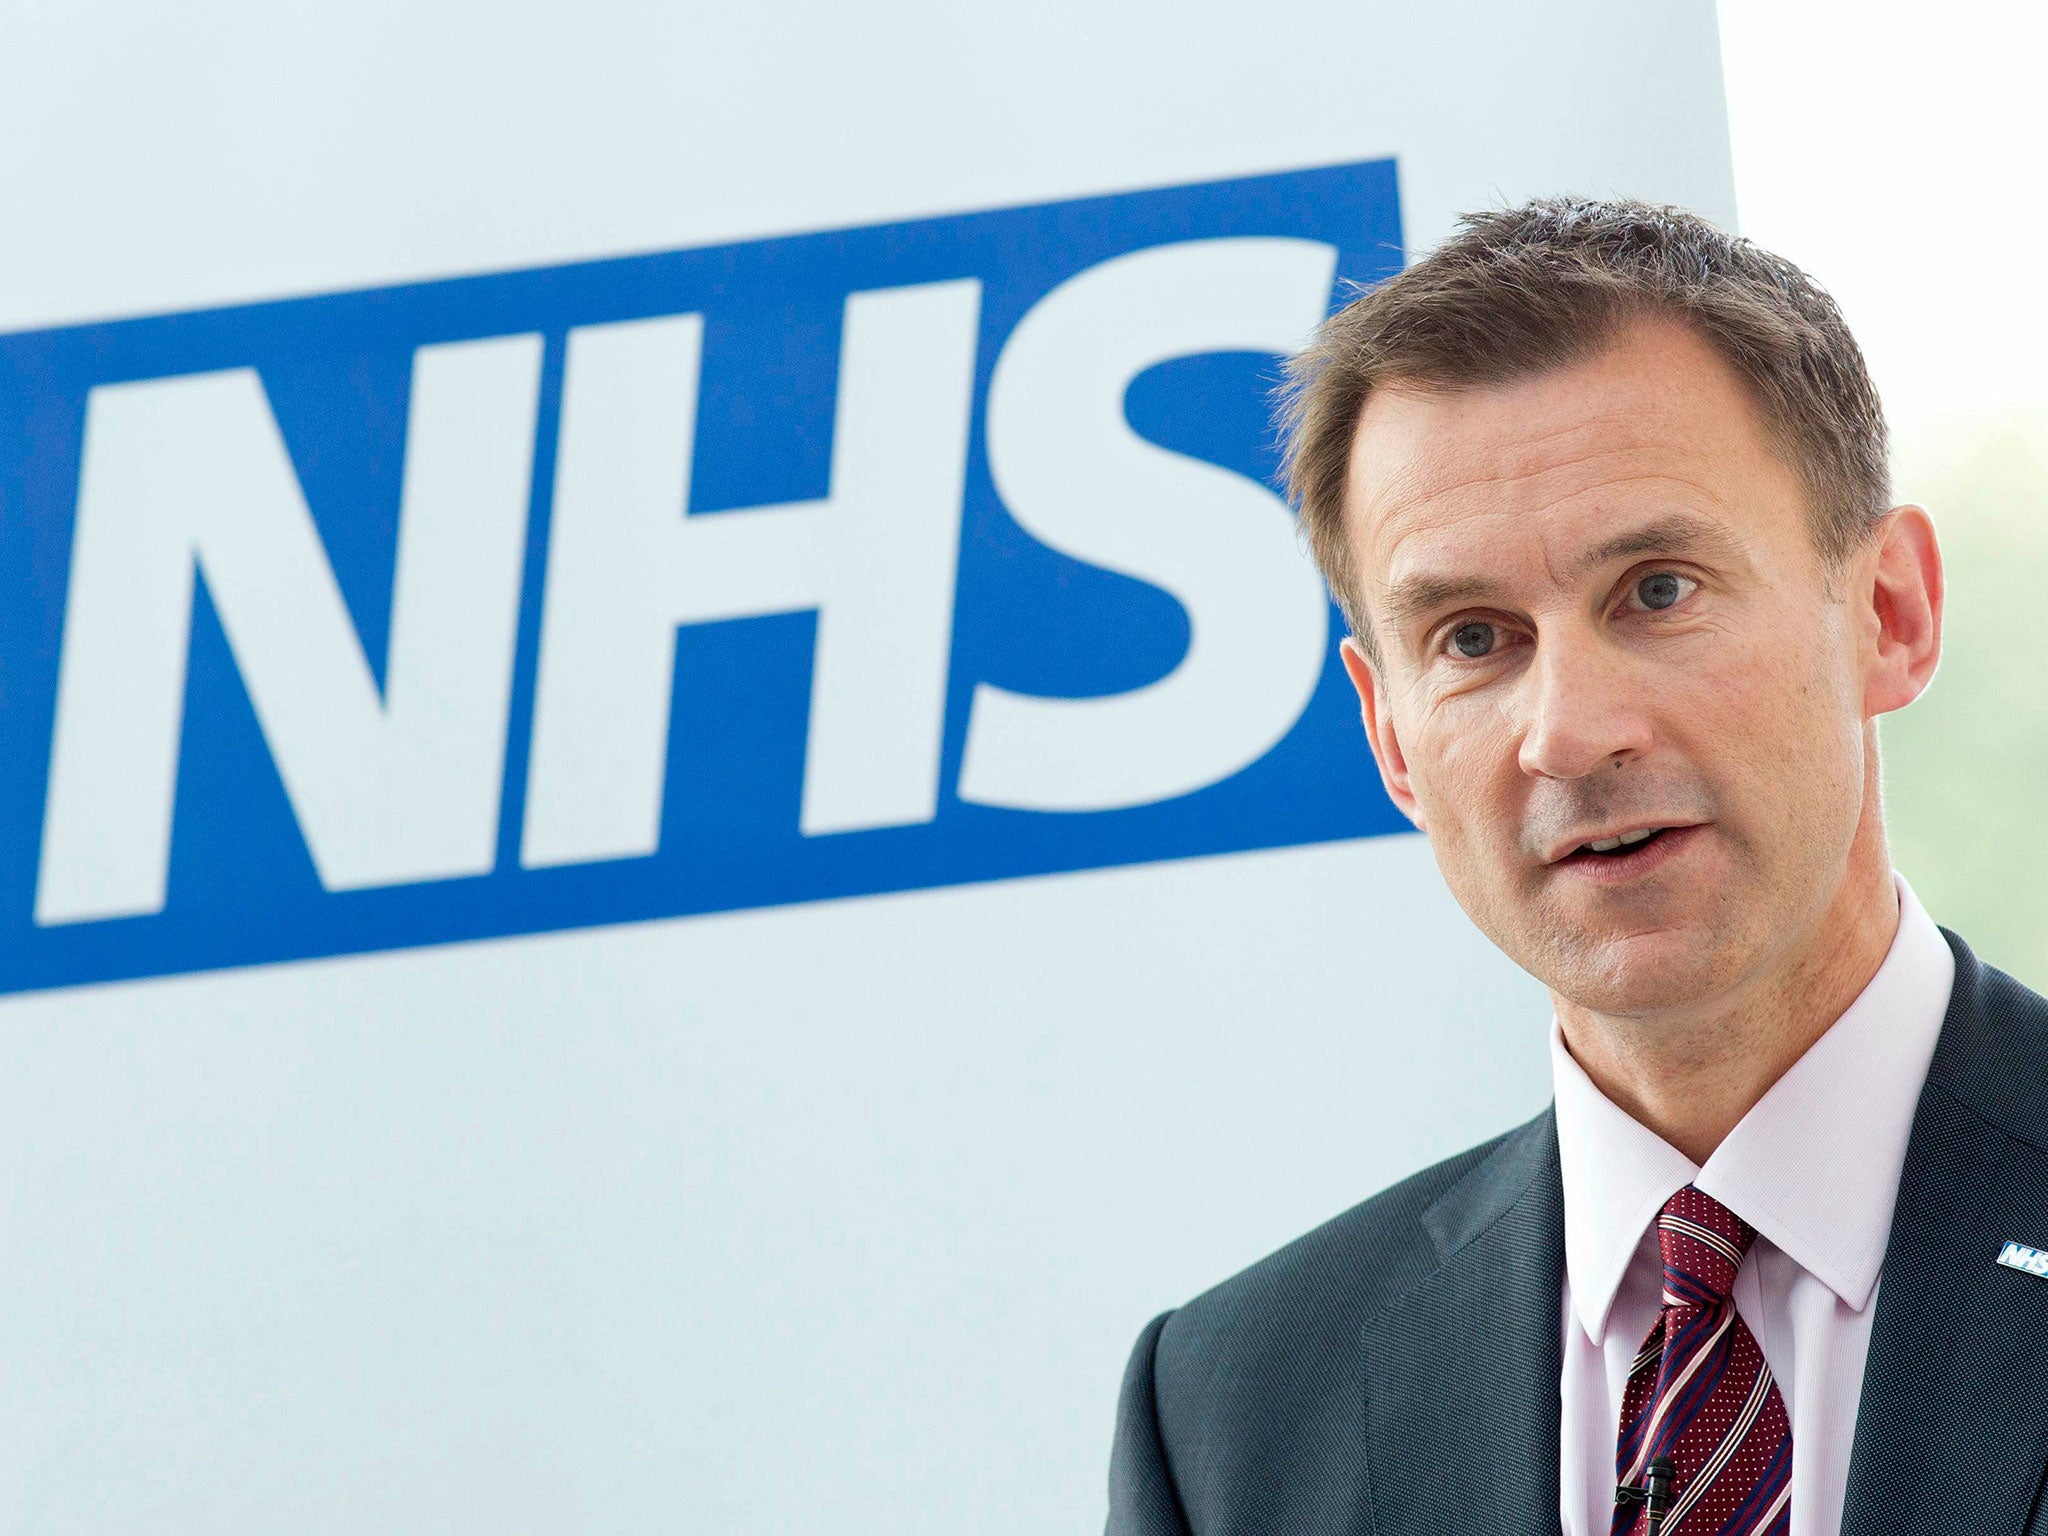 Jeremy Hunt rejected claims he was responsible for harm done during the NHS strike